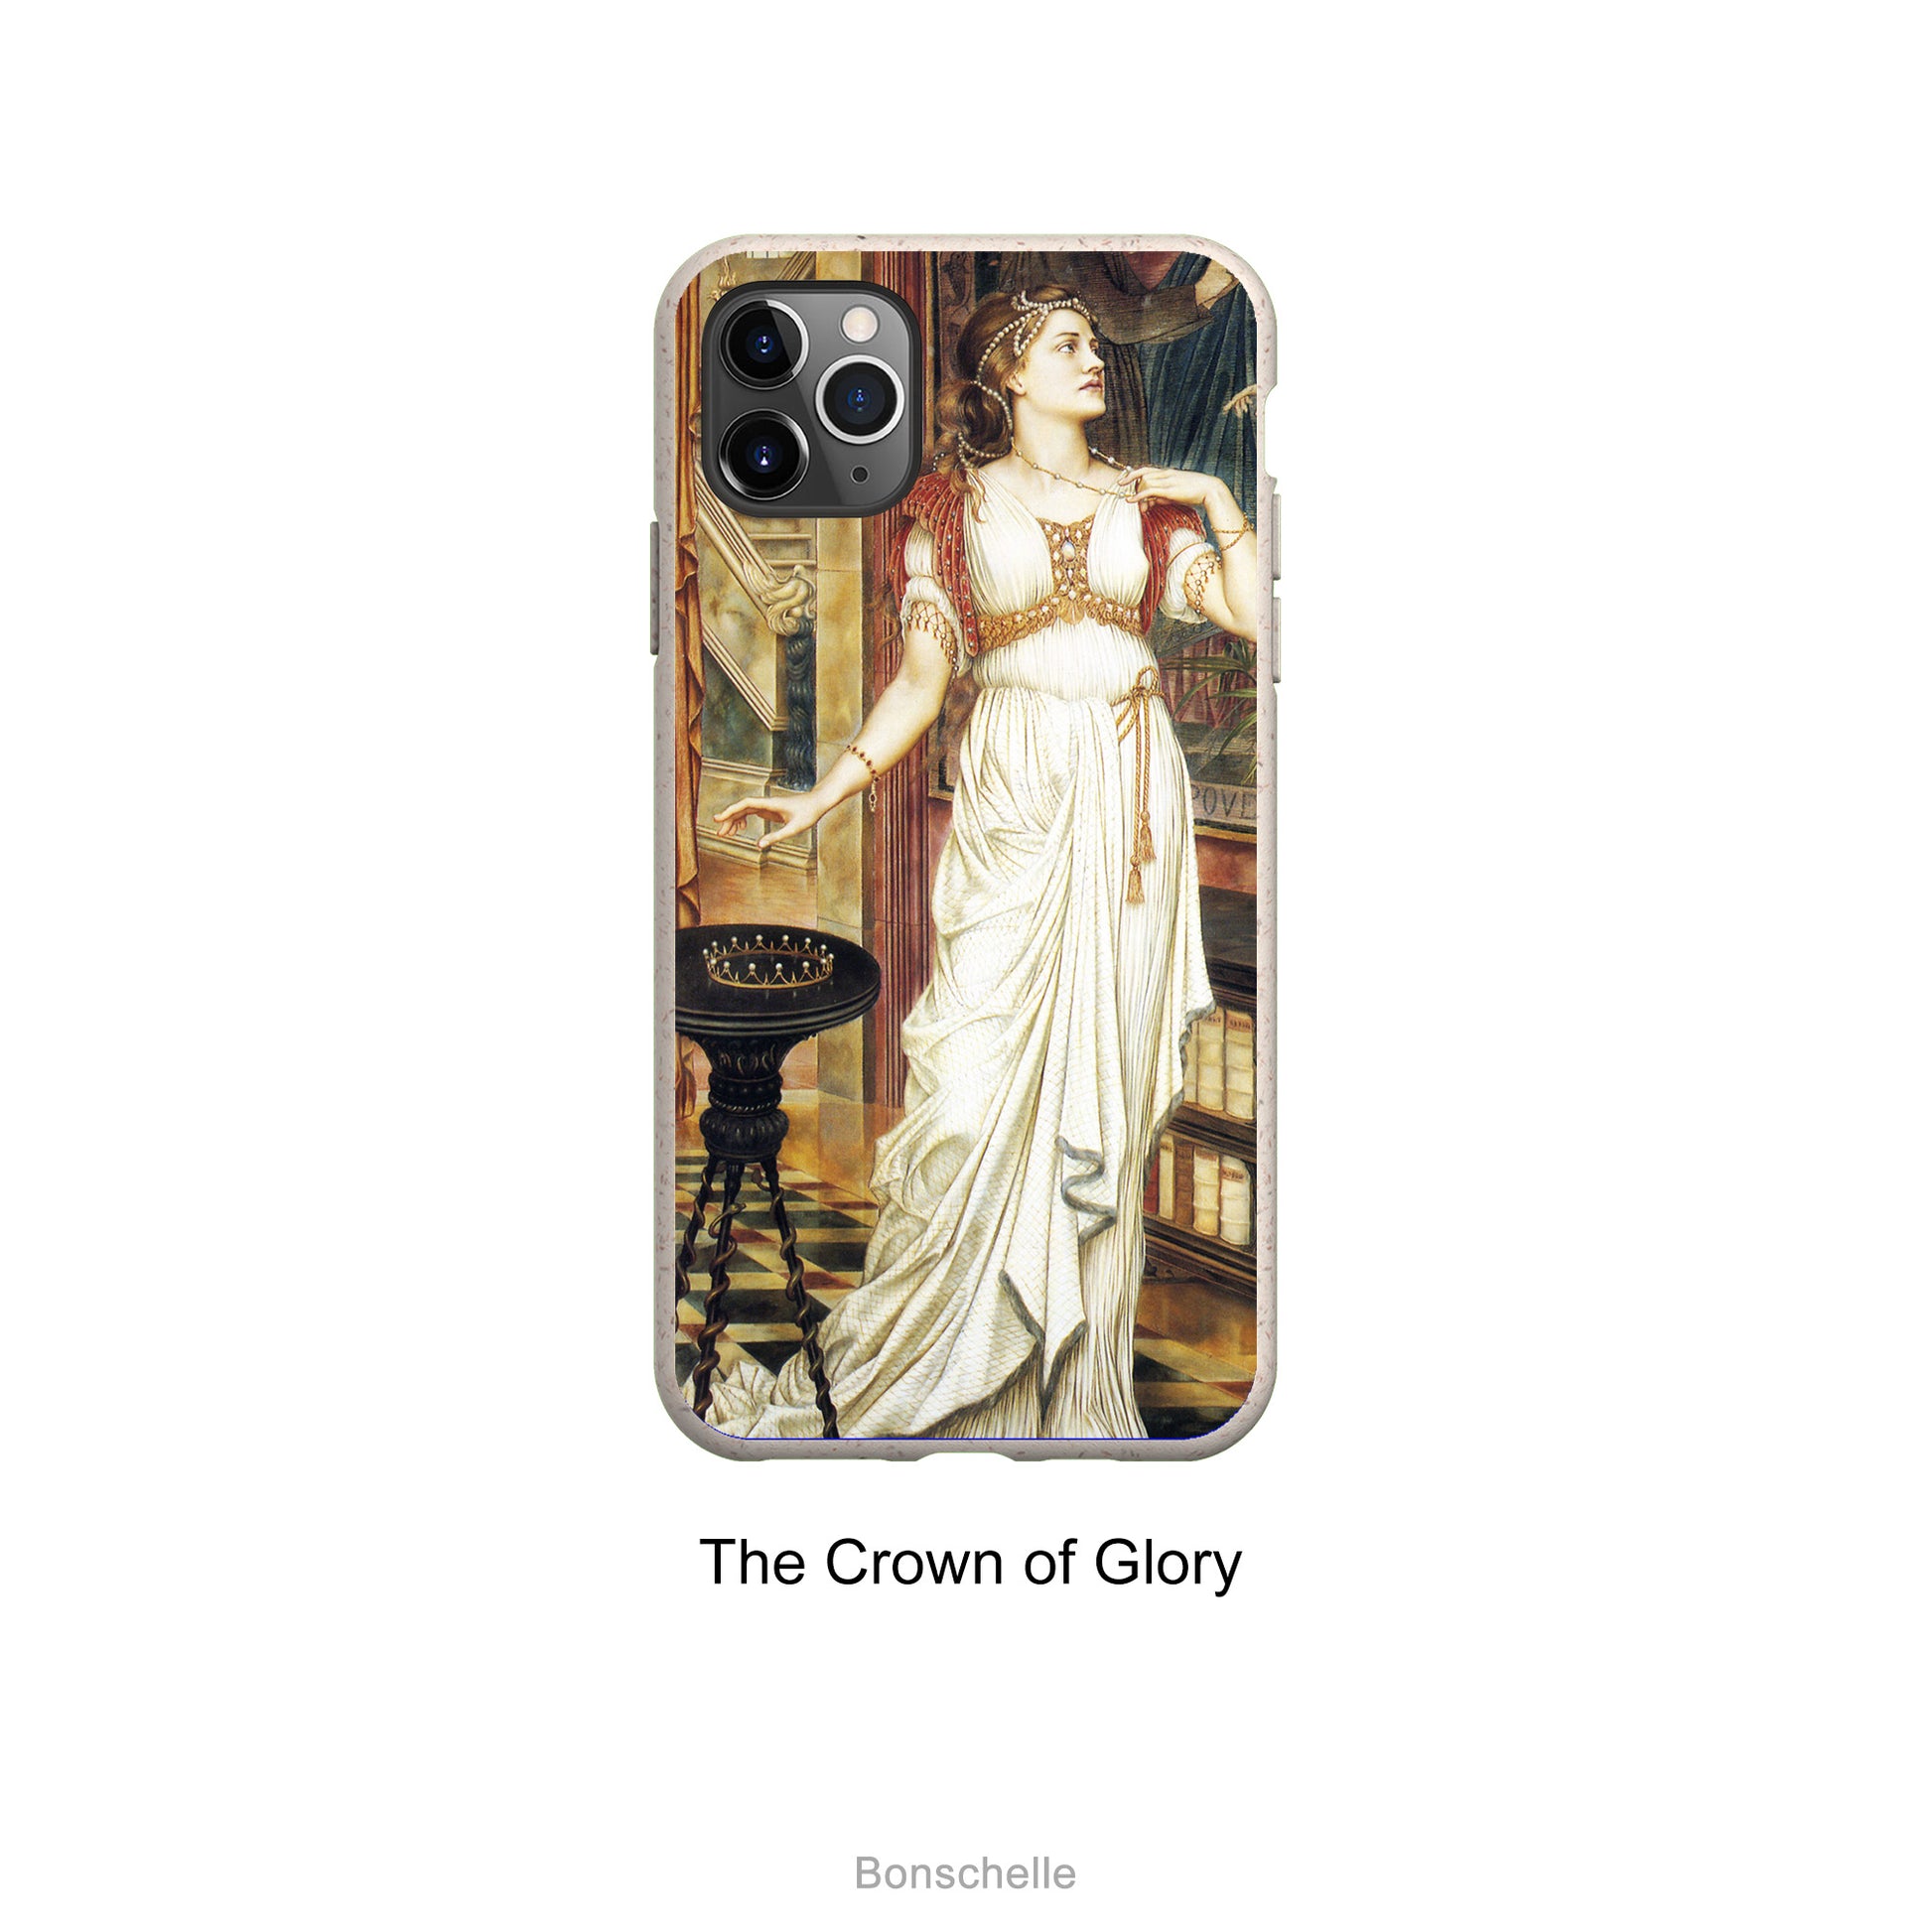 Evelyn De Morgan Pre-Raphaelite Painting 'The Crown of Glory' Eco Phone Cases for Samsung and iPhone